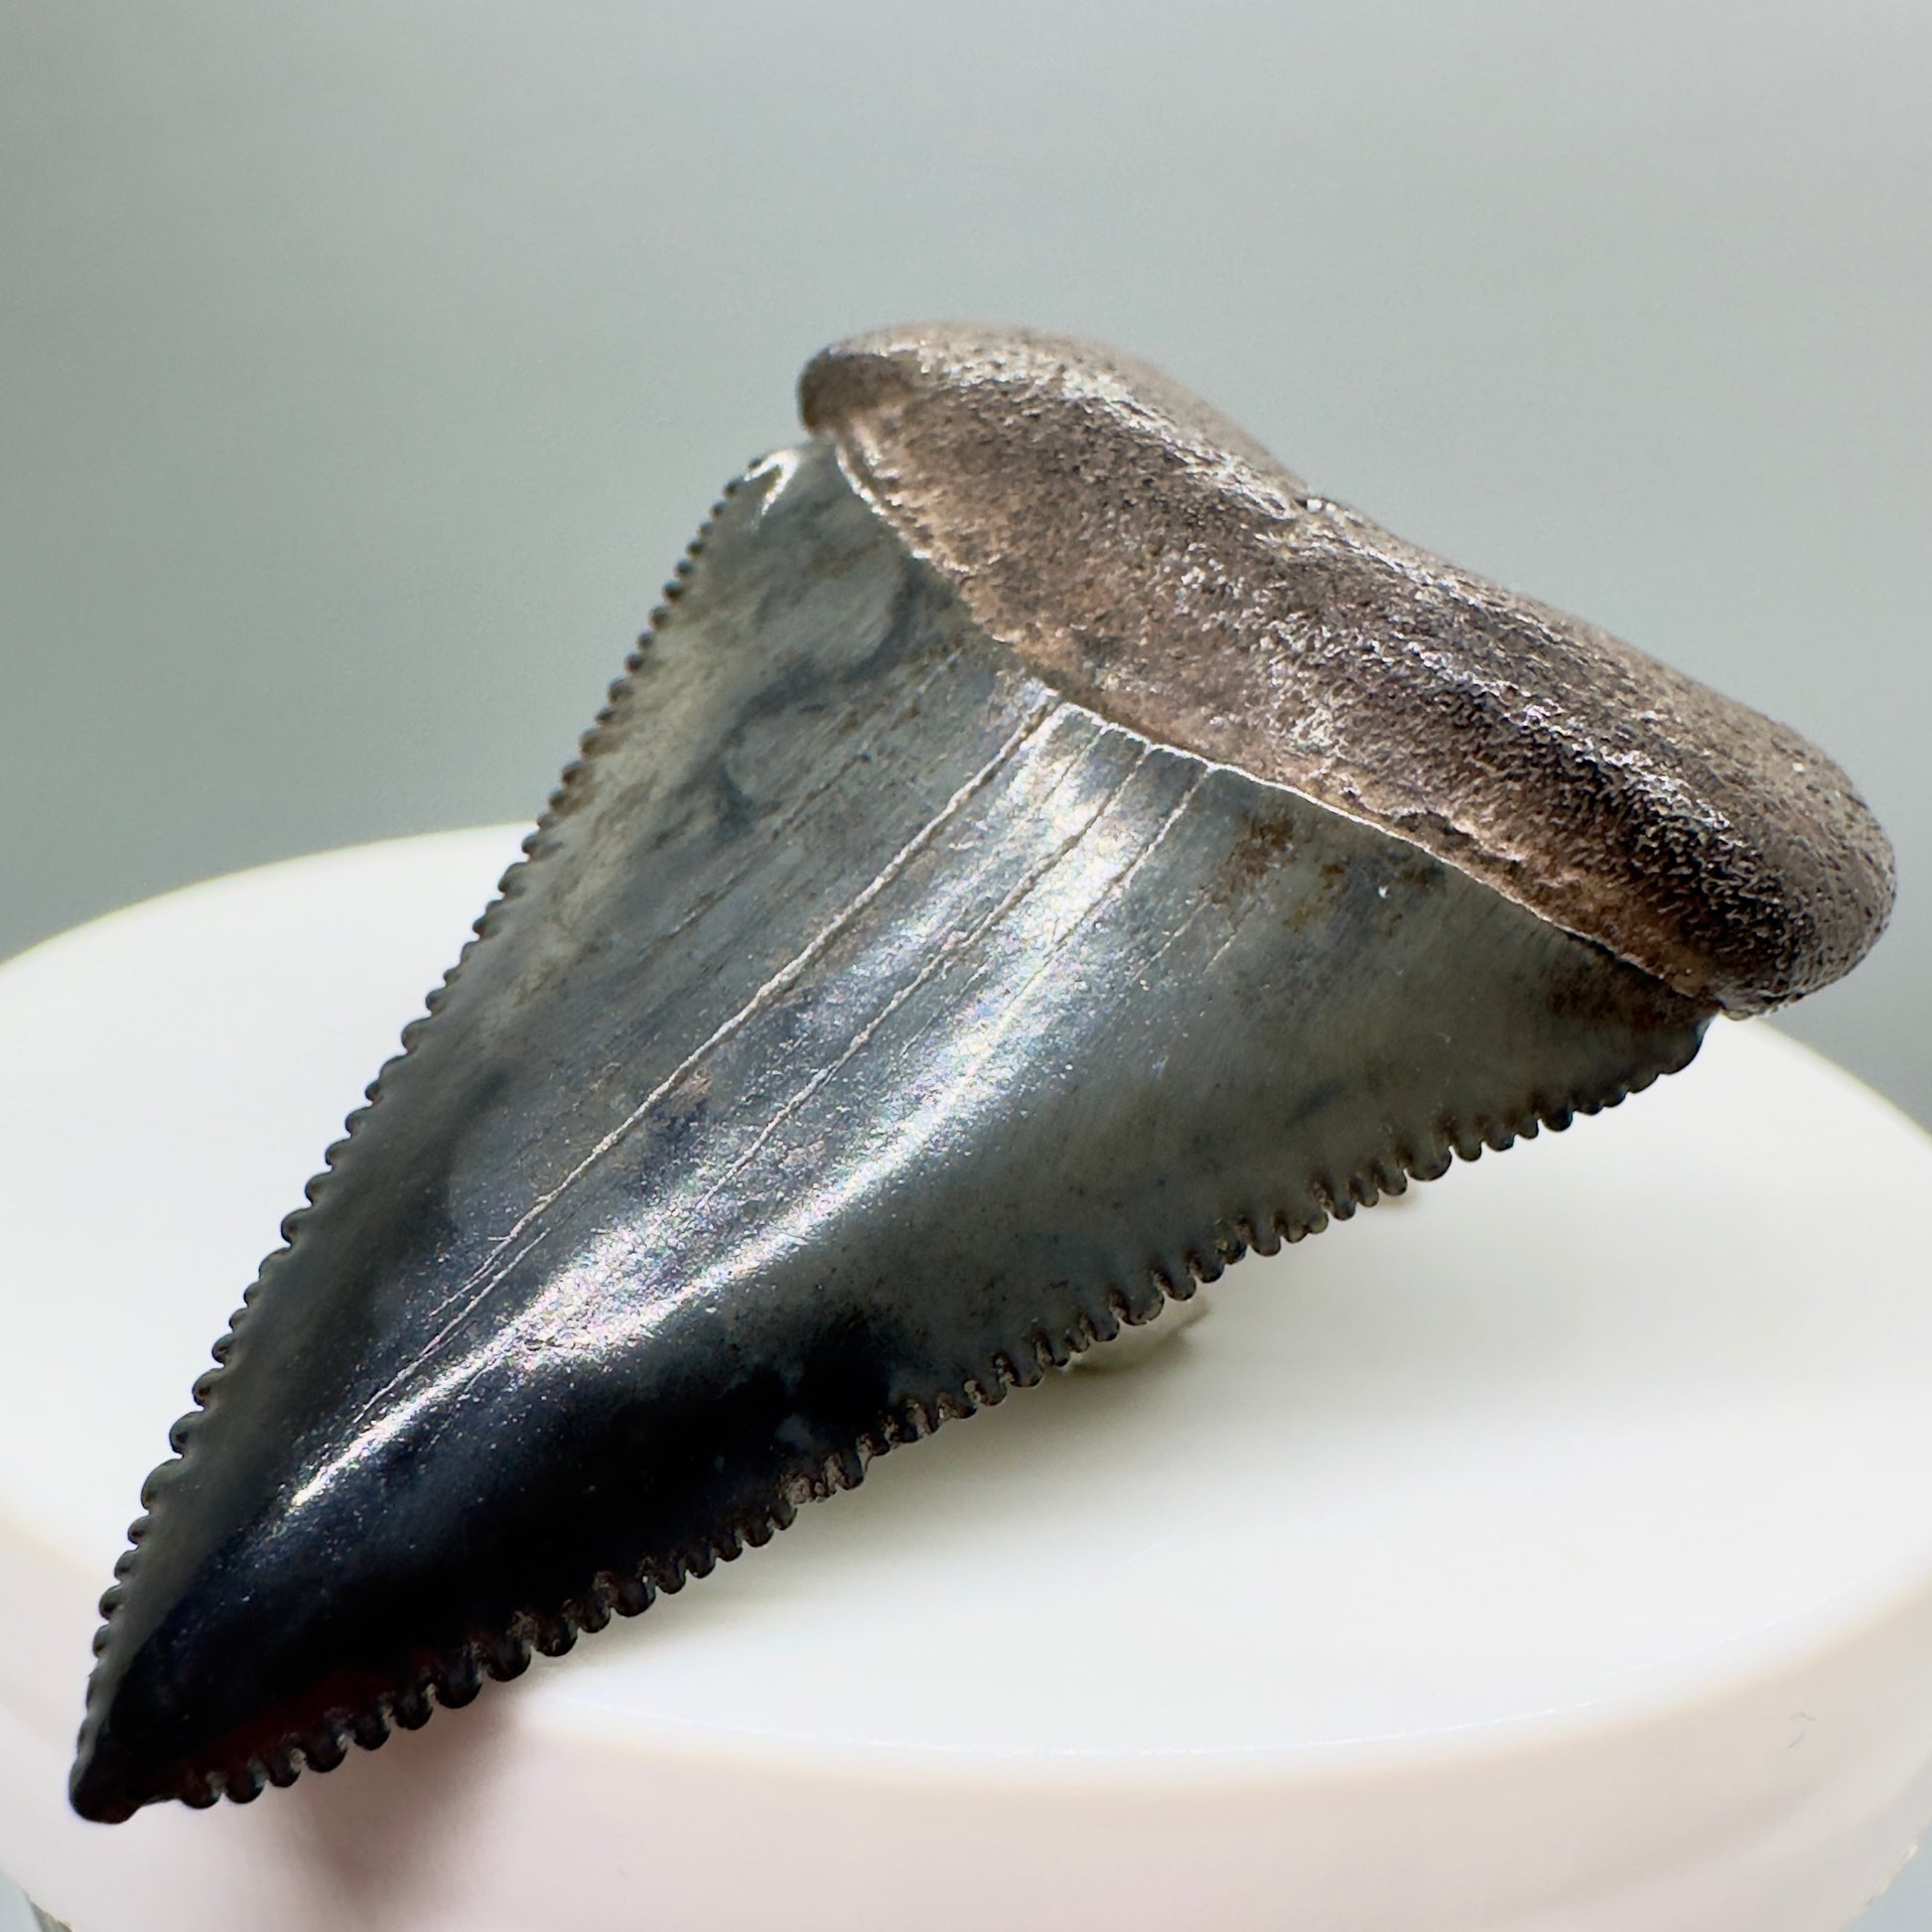 Colorful, sharply serrated 1.87" Fossil Great White Shark Tooth - South Carolina River GW1079 - Front right